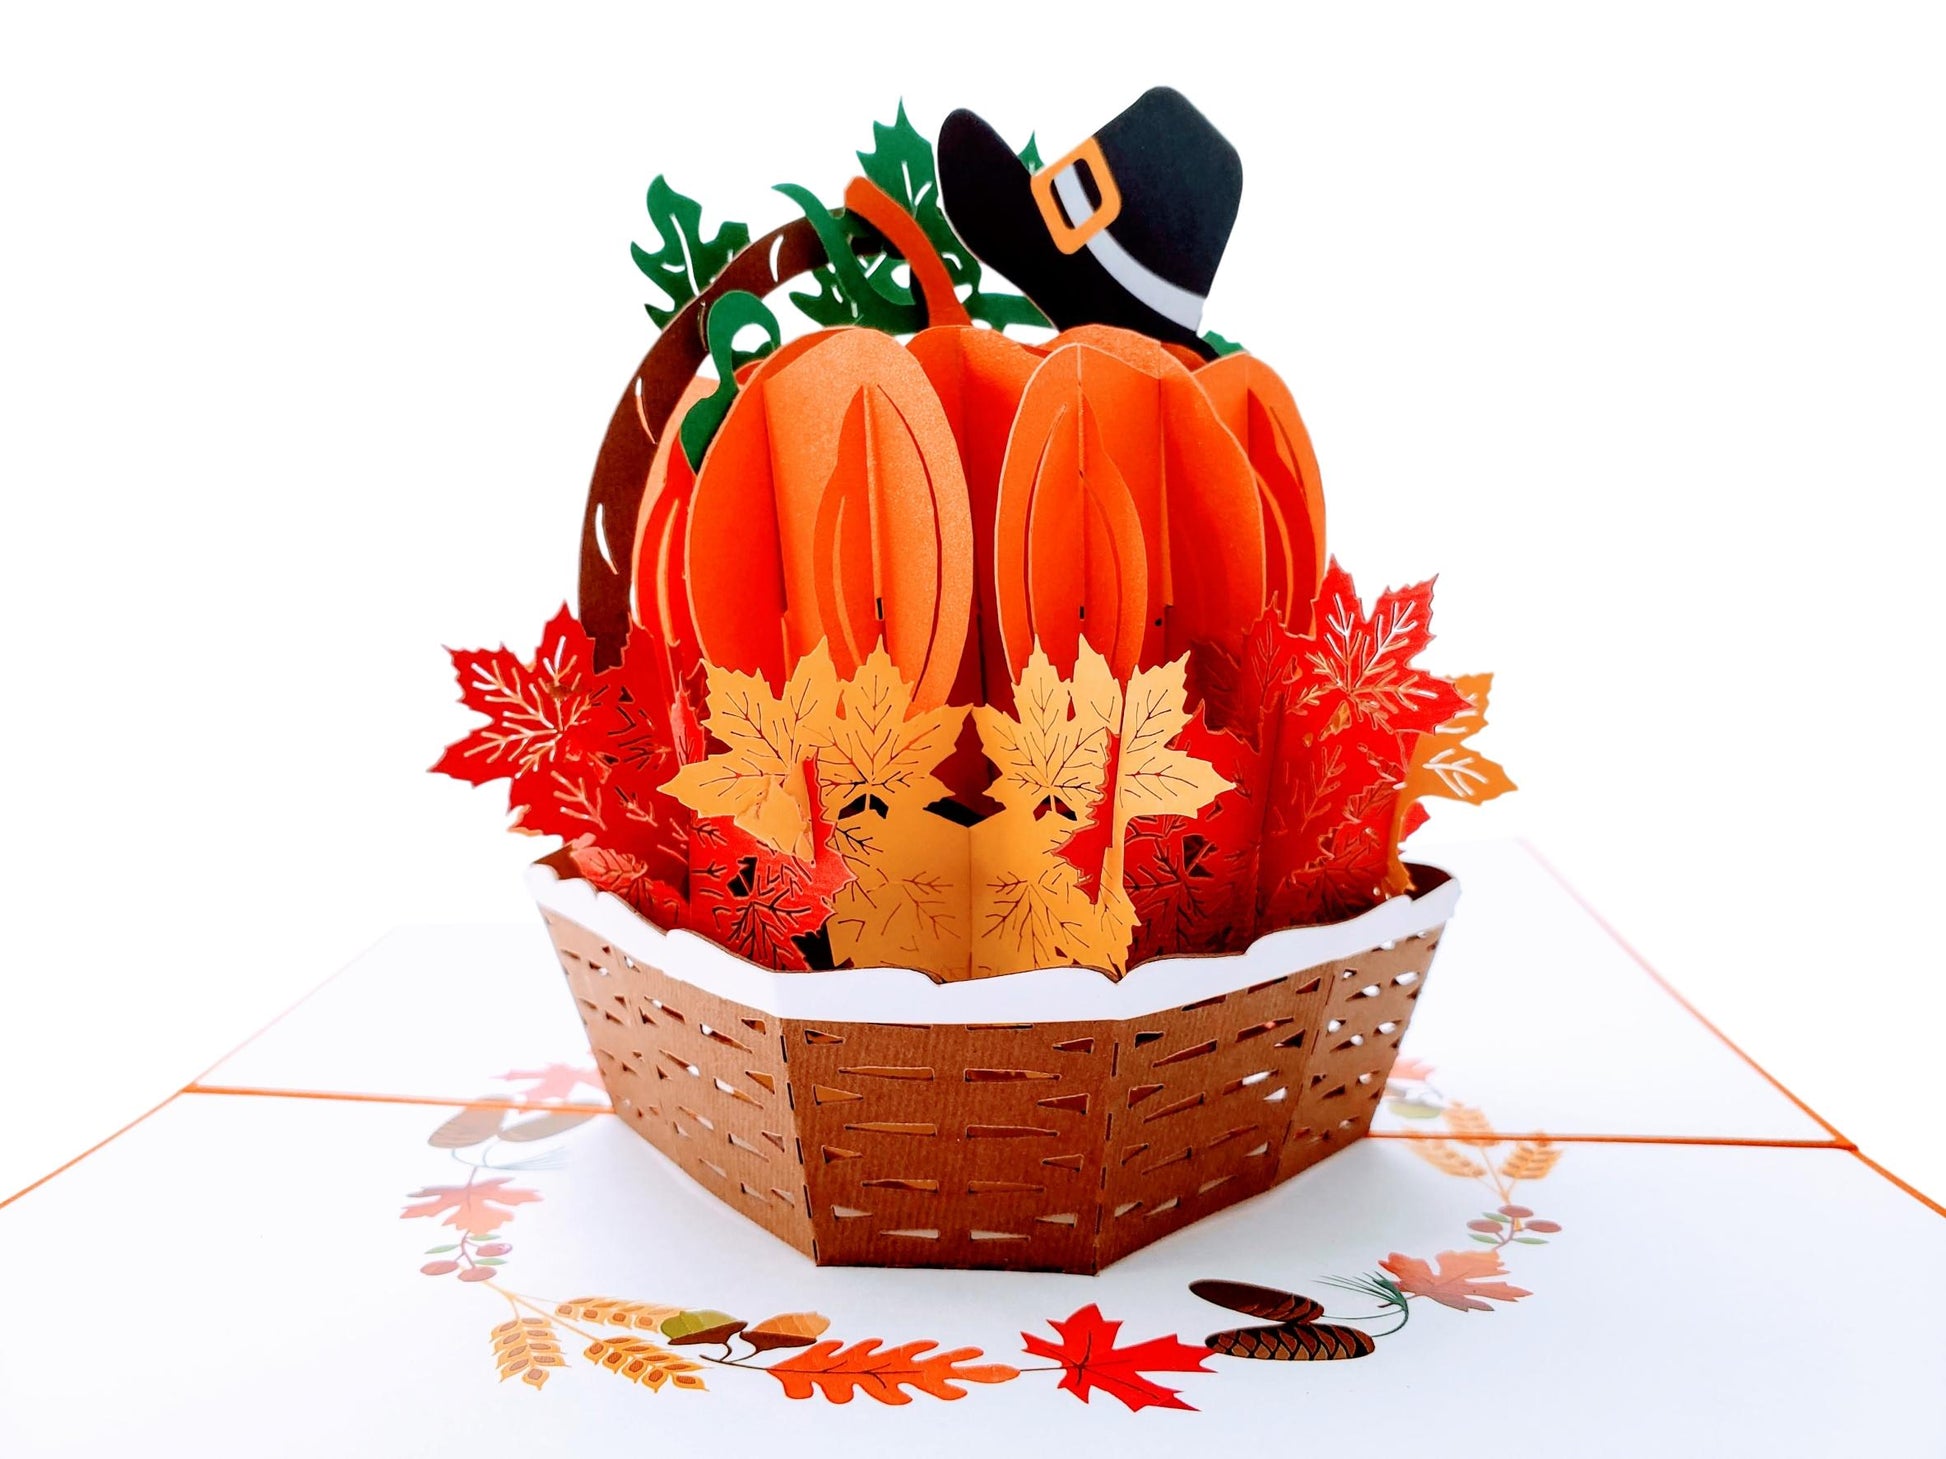 Happy Thanksgiving Pumpkin Pop Up Greeting Card - best deal - Happy Thanksgiving - Thanksgiving - iGifts And Cards